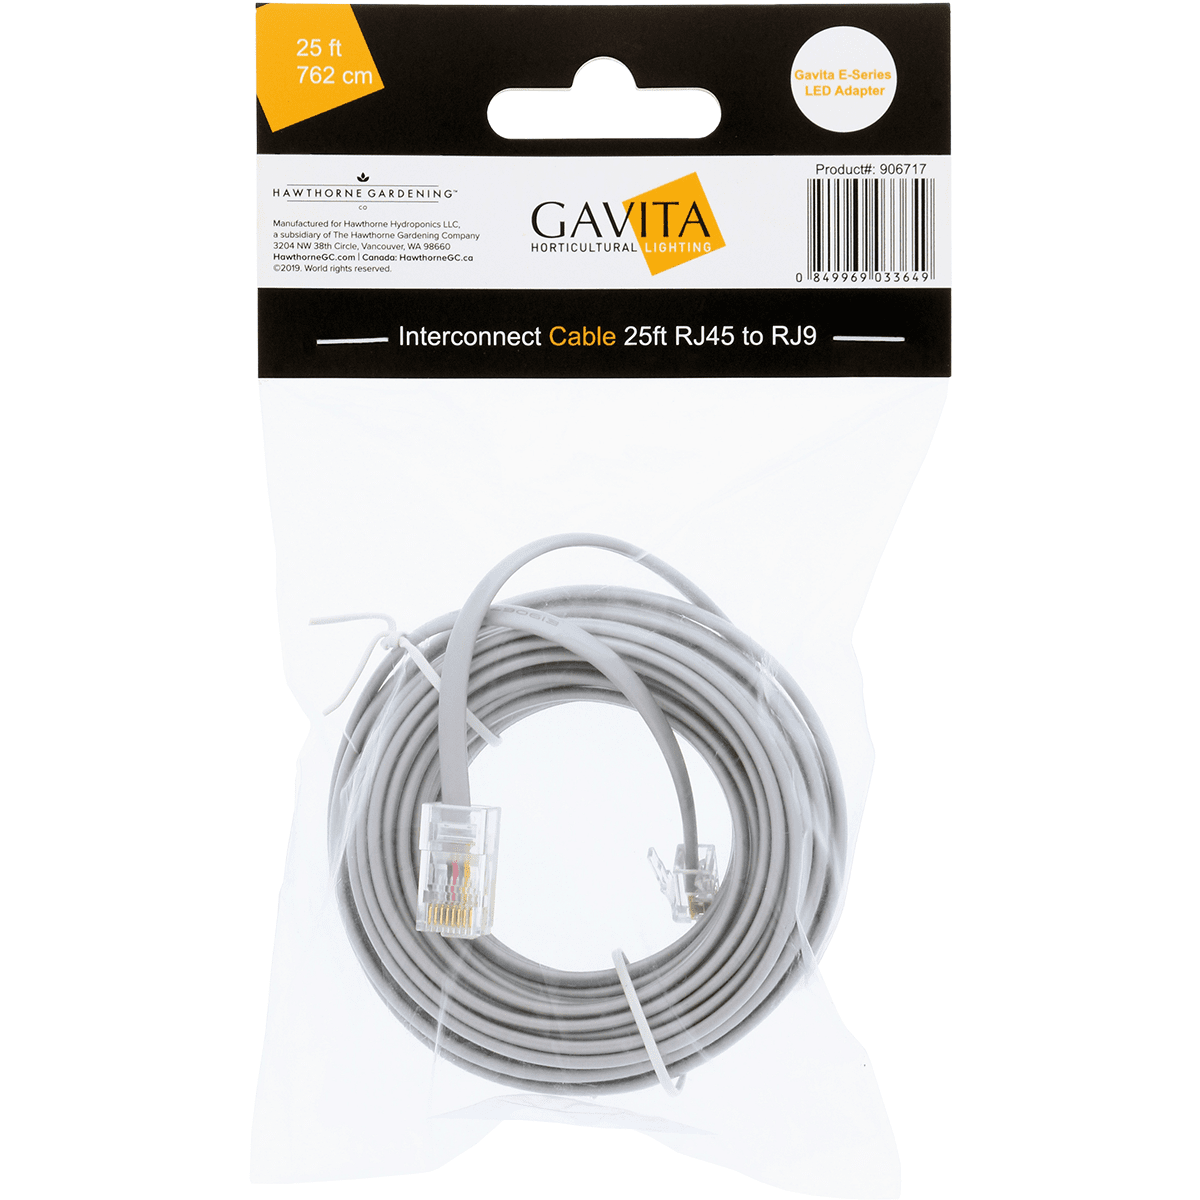 Gavita E-Series LED Adapter Interconnect Cable RJ45 to RJ9 - 25ft